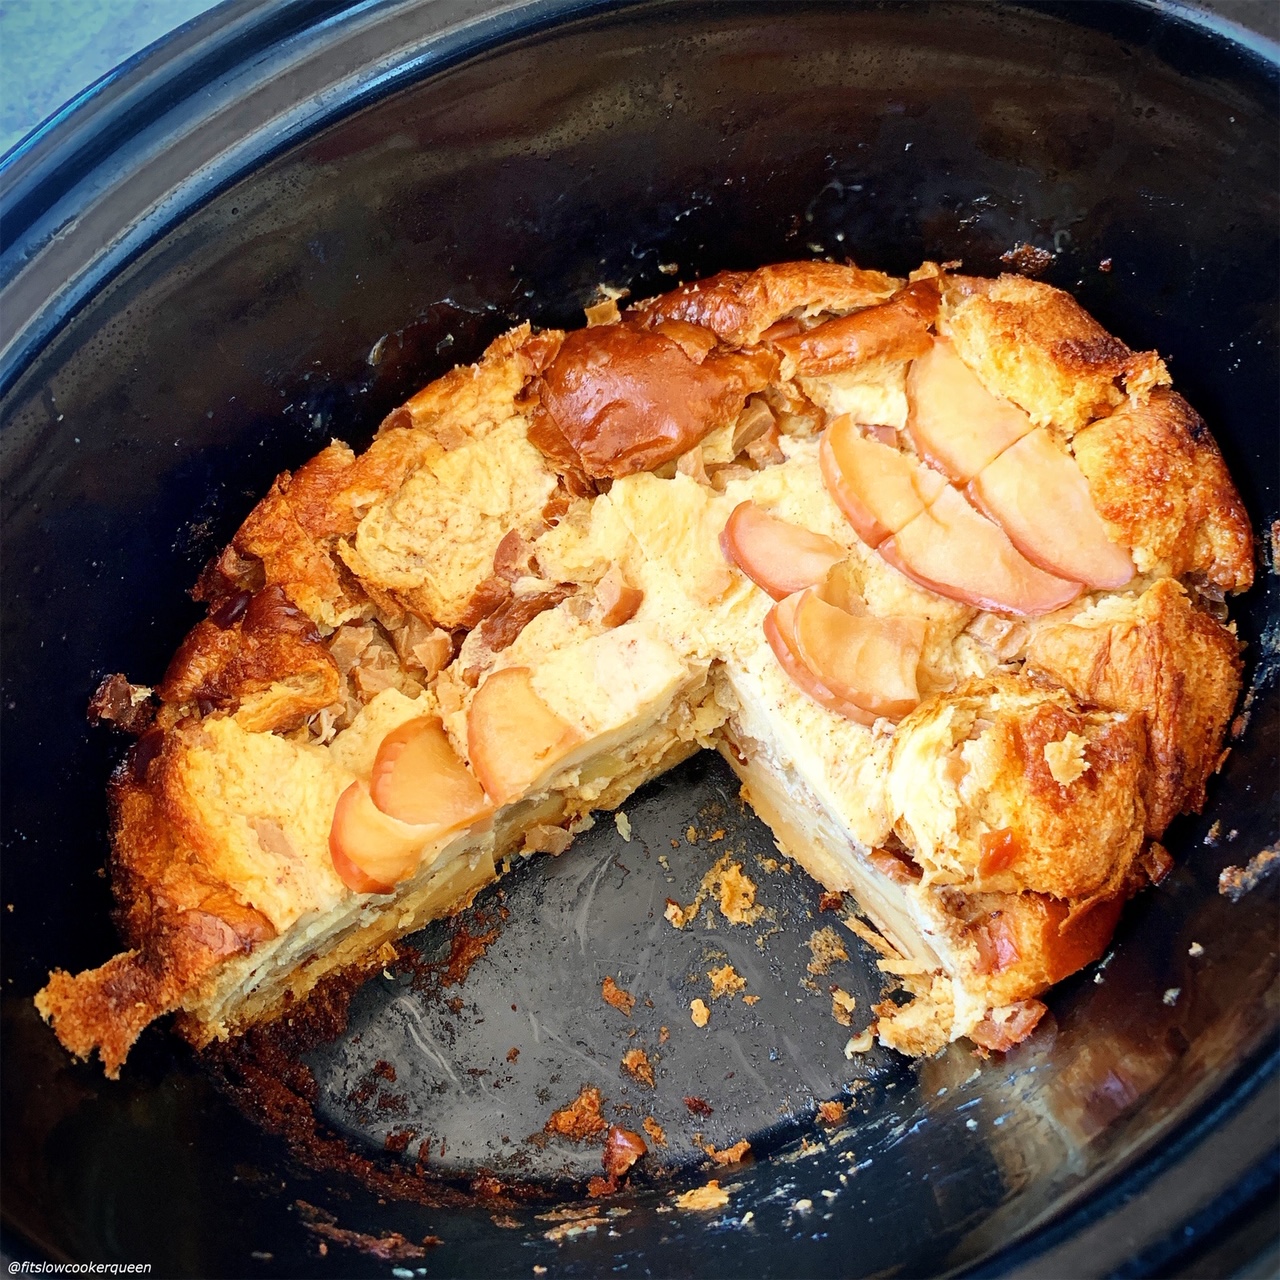 cooked Slow Cooker Apples & Honey Challah Bread Pudding in the slow cooker with a piece missing